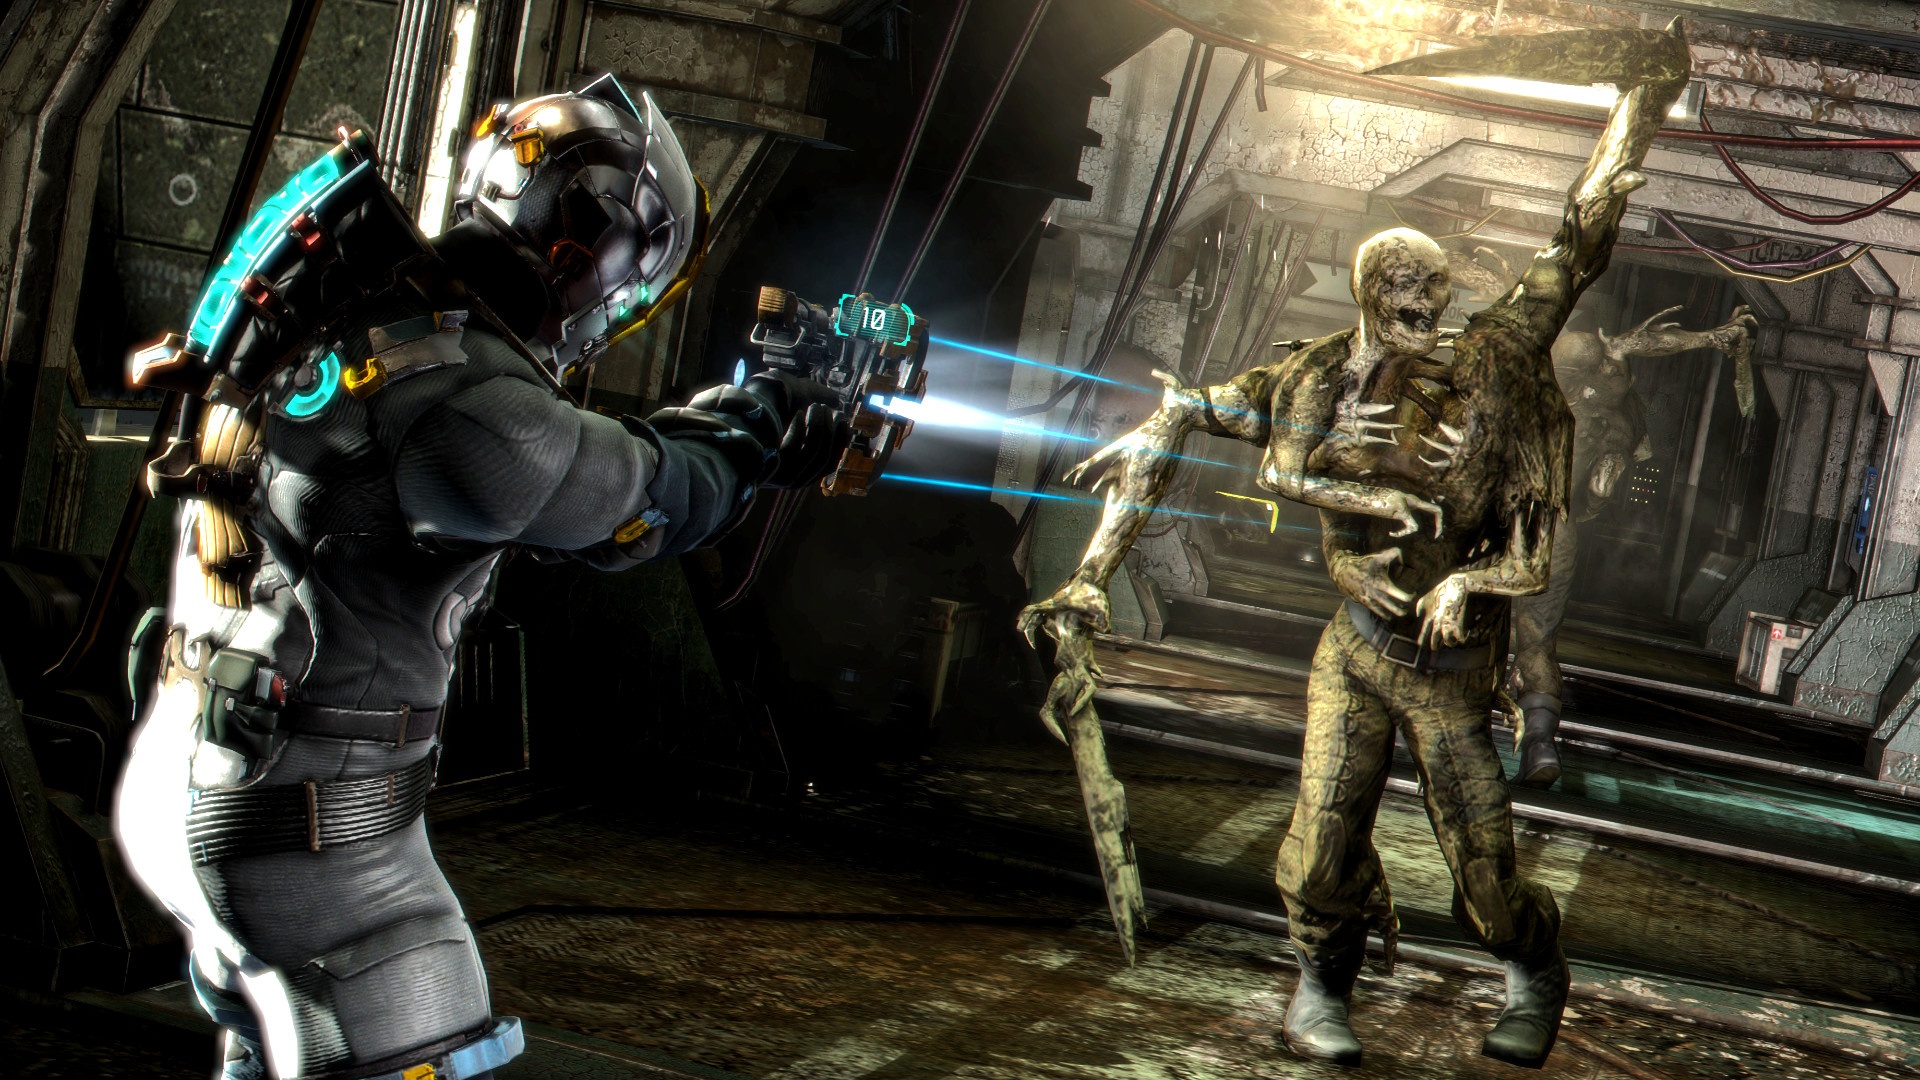 Dead Space Remake is coming sooner than we expected